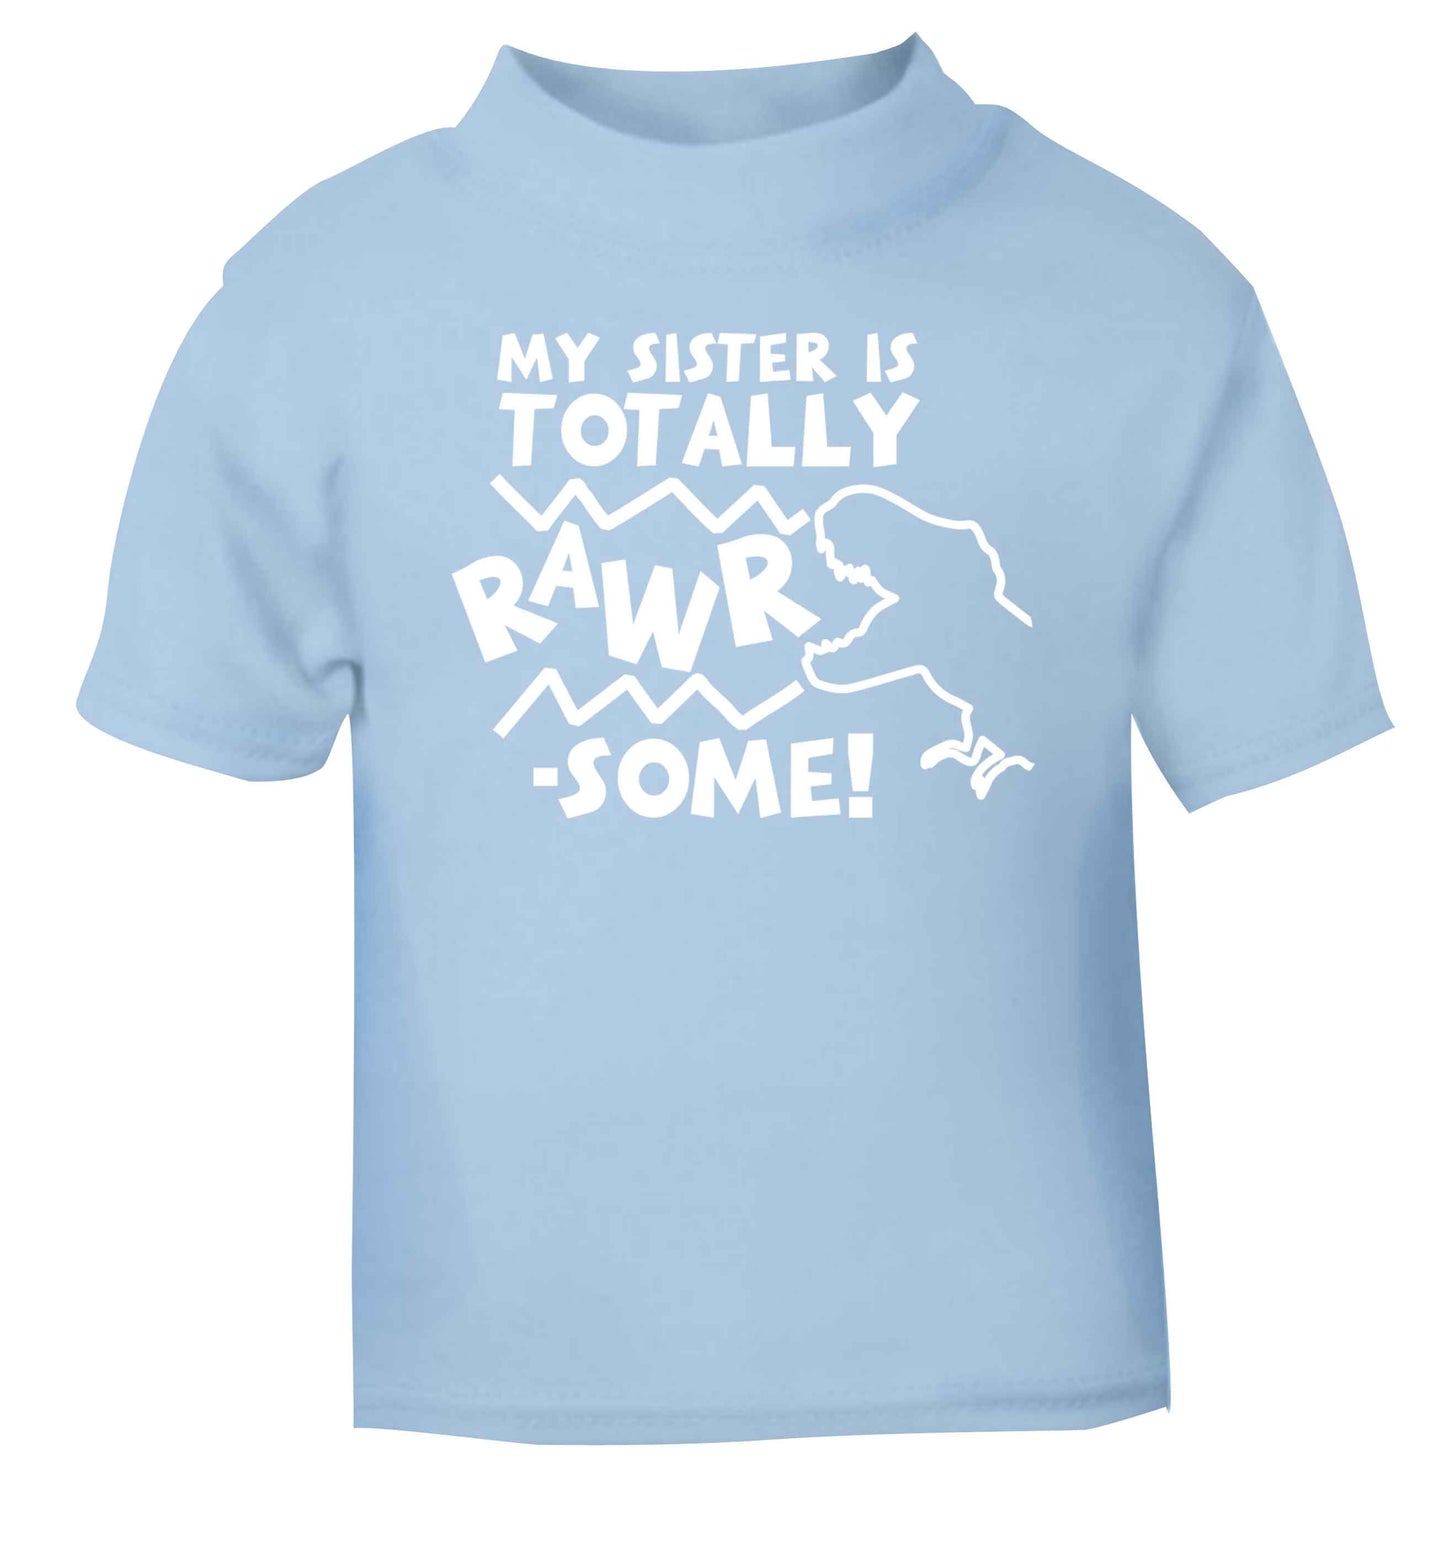 My sister is totally rawrsome light blue baby toddler Tshirt 2 Years